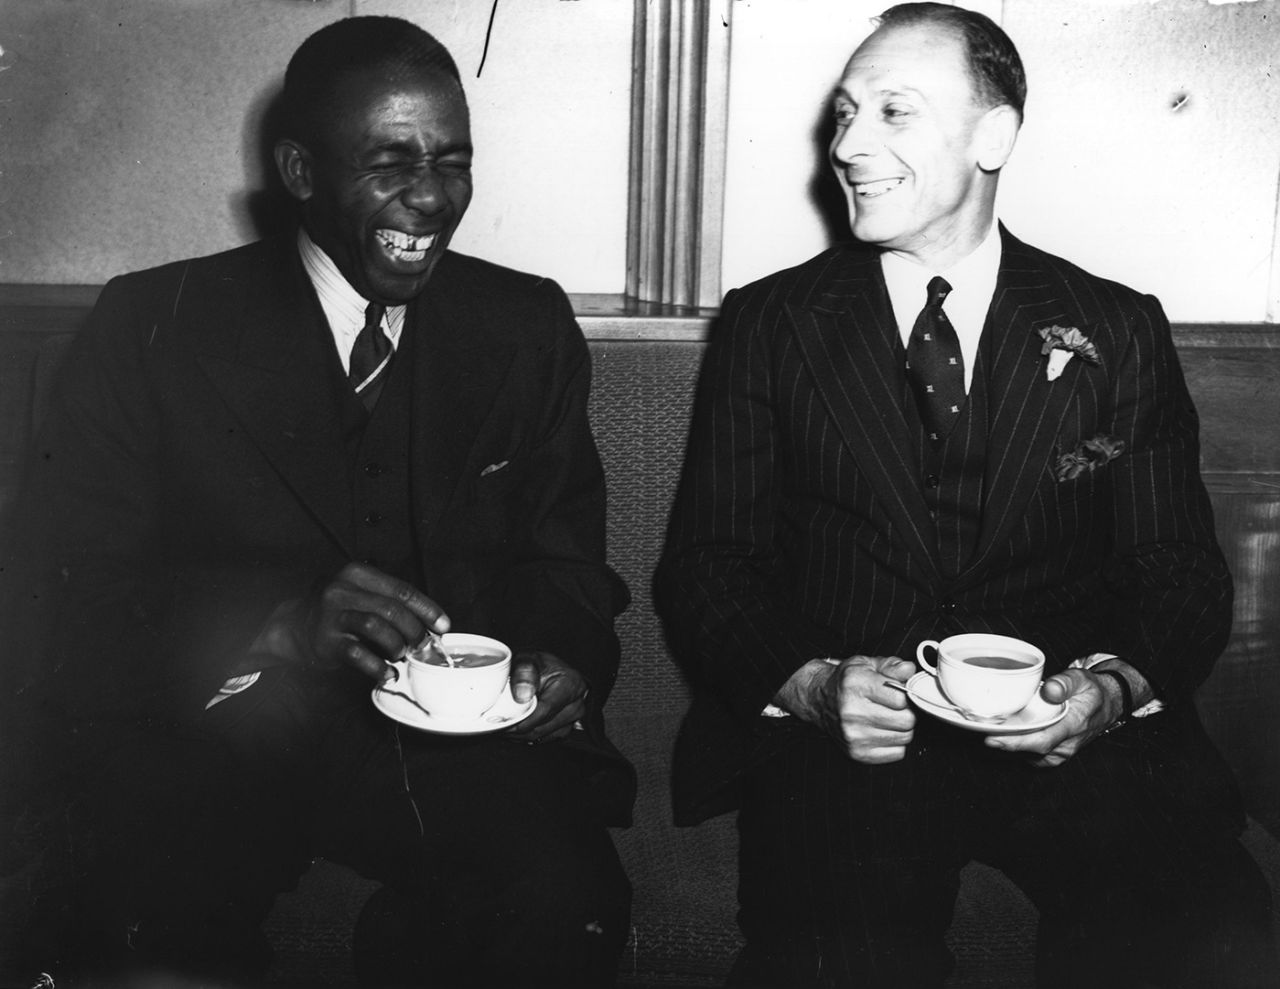 Learie Constantine (left) and Jack Hobbs share a laugh at a reception for the West Indian team at Overseas House, London, June 23, 1939